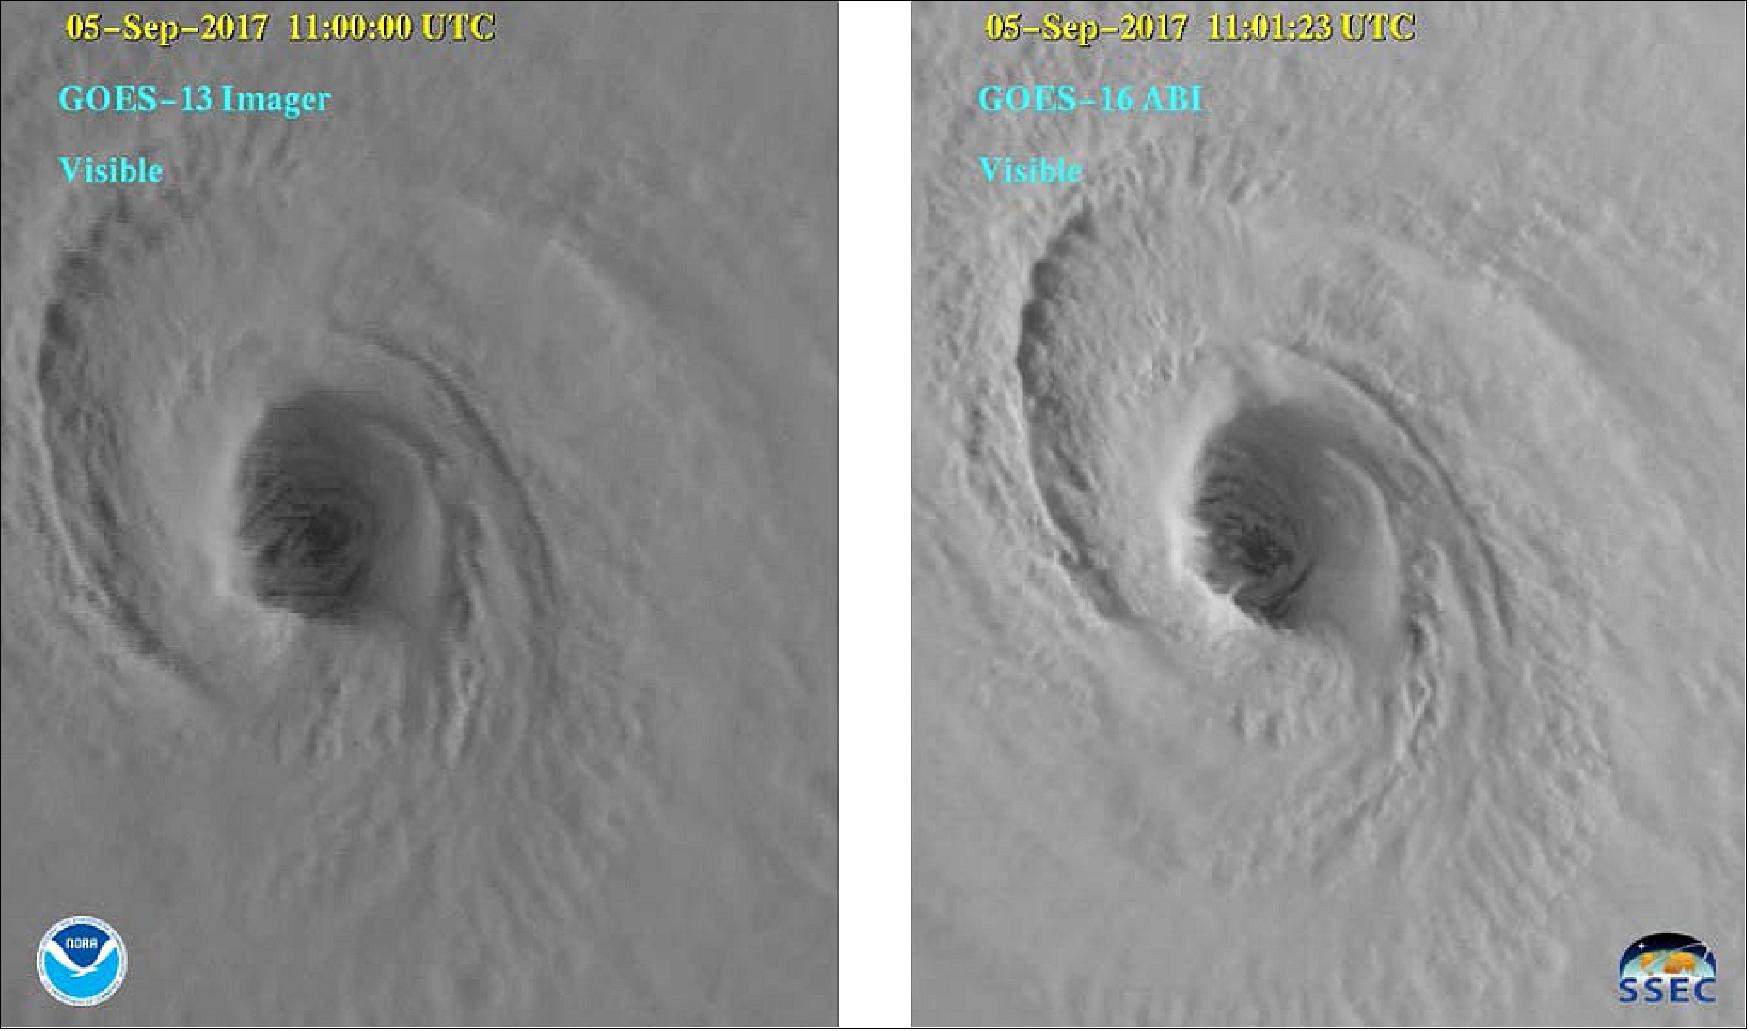 Figure 13: This figure demonstrates the increased spatial resolution of satellite data for Hurricane Irma from GOES-13 [left] and GOES-16 [right]. On previous GOES missions these high-resolution images were not routine, but with GOES-16’s advanced capabilities, these images are now operational (image credit: Colorado Institute for Research in the Atmosphere, Colorado State University)